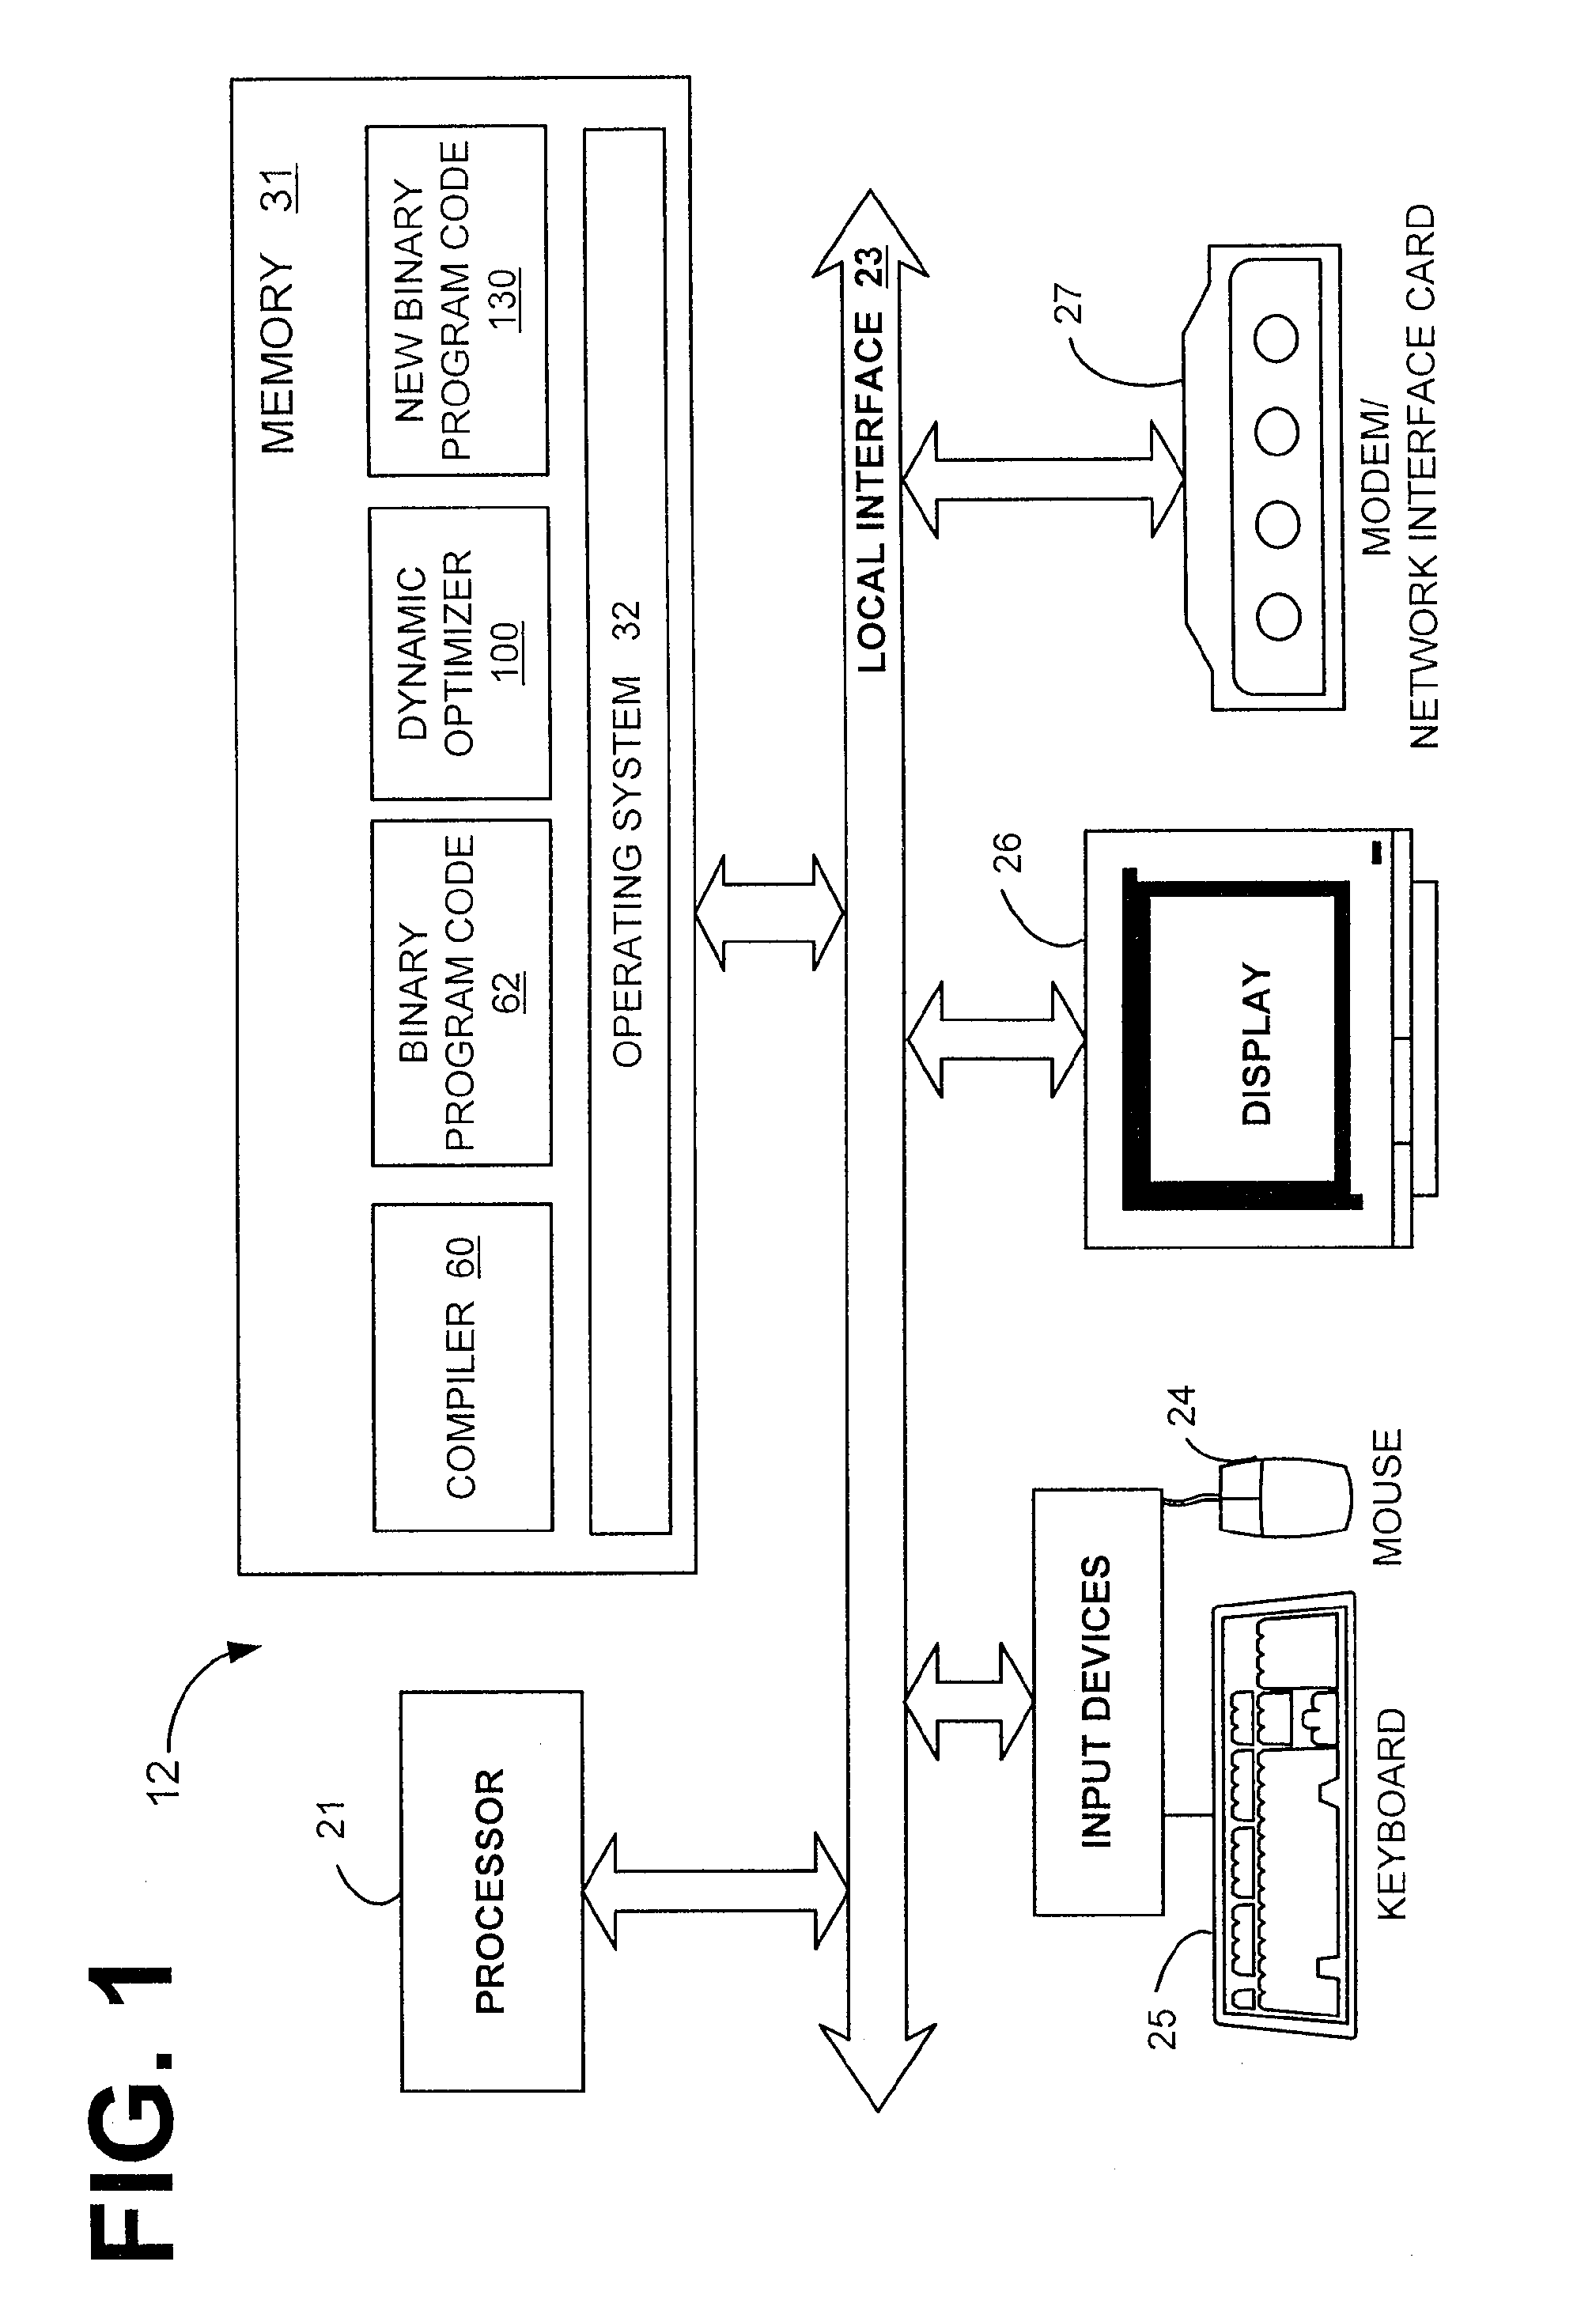 System and Method for Efficiently Passing Information Between Compiler and Post-Compile-Time Software